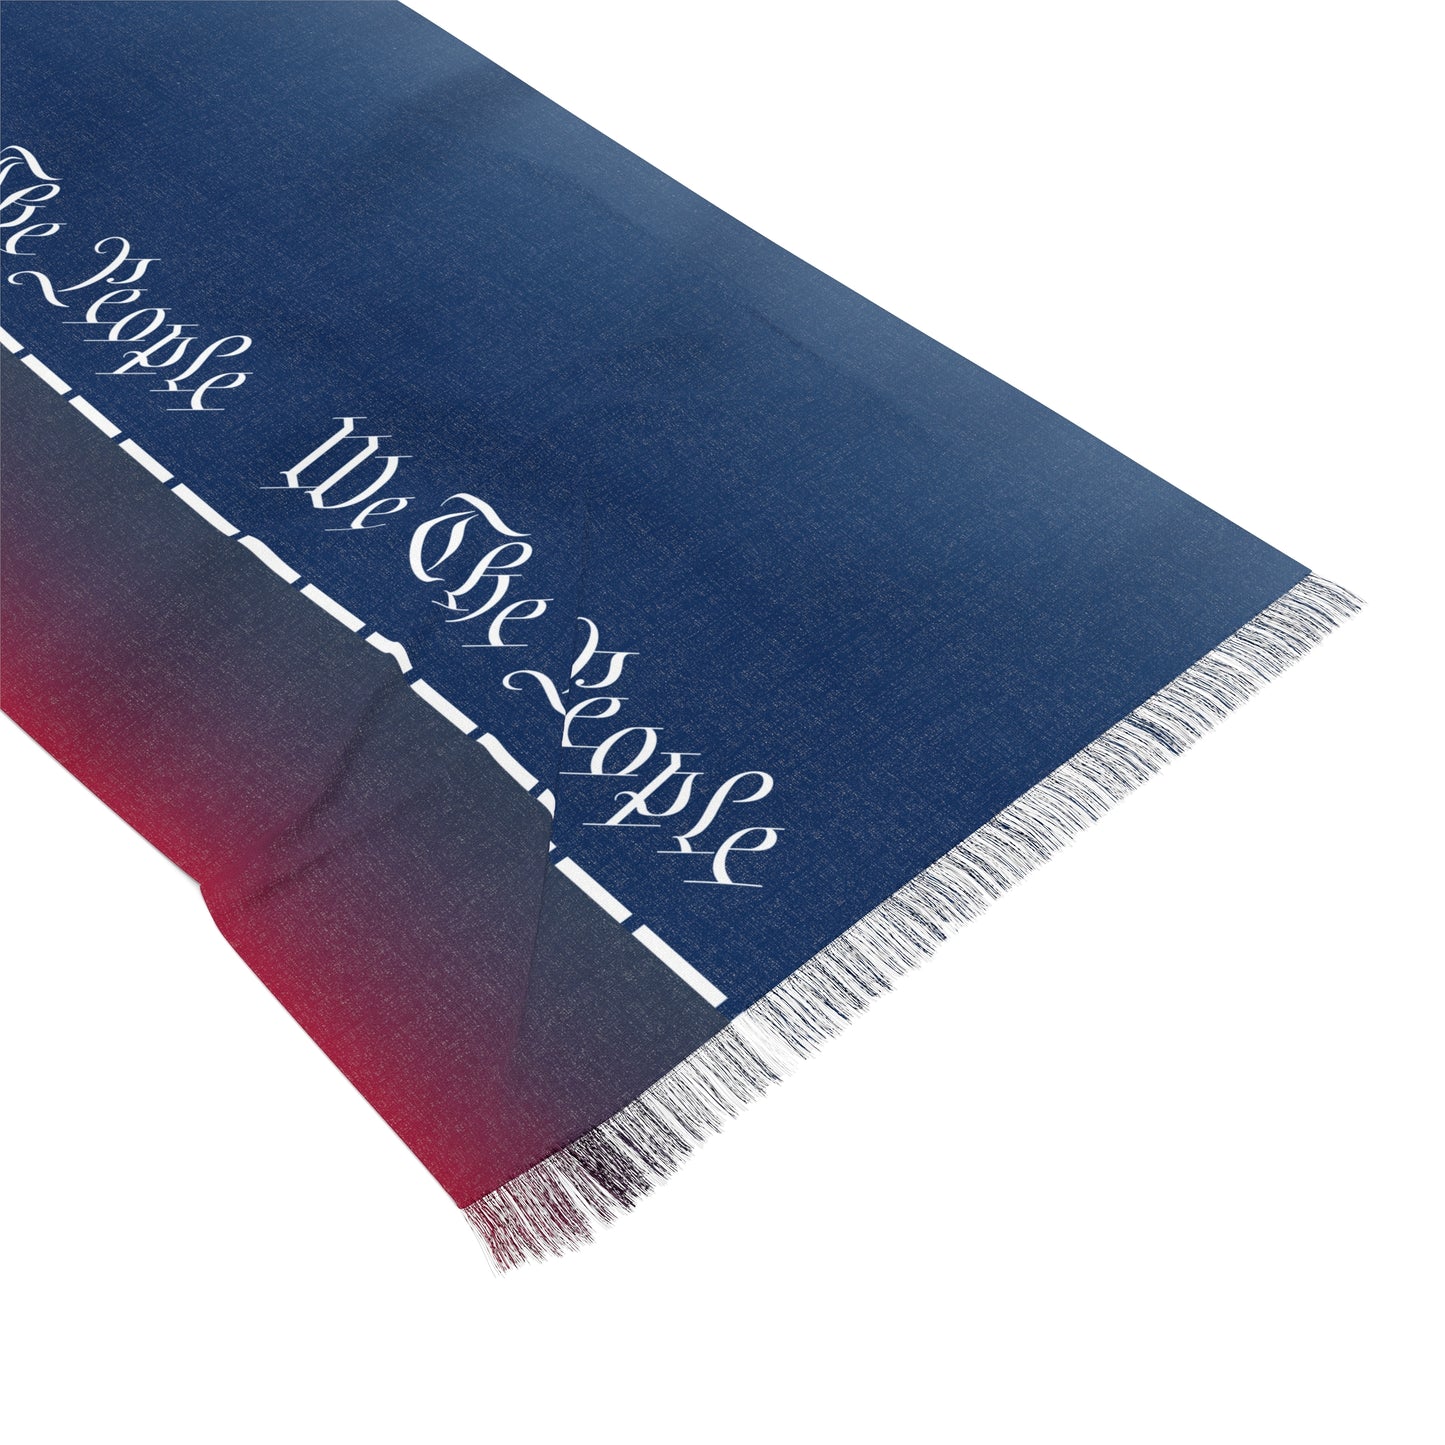 We The People Light Scarf